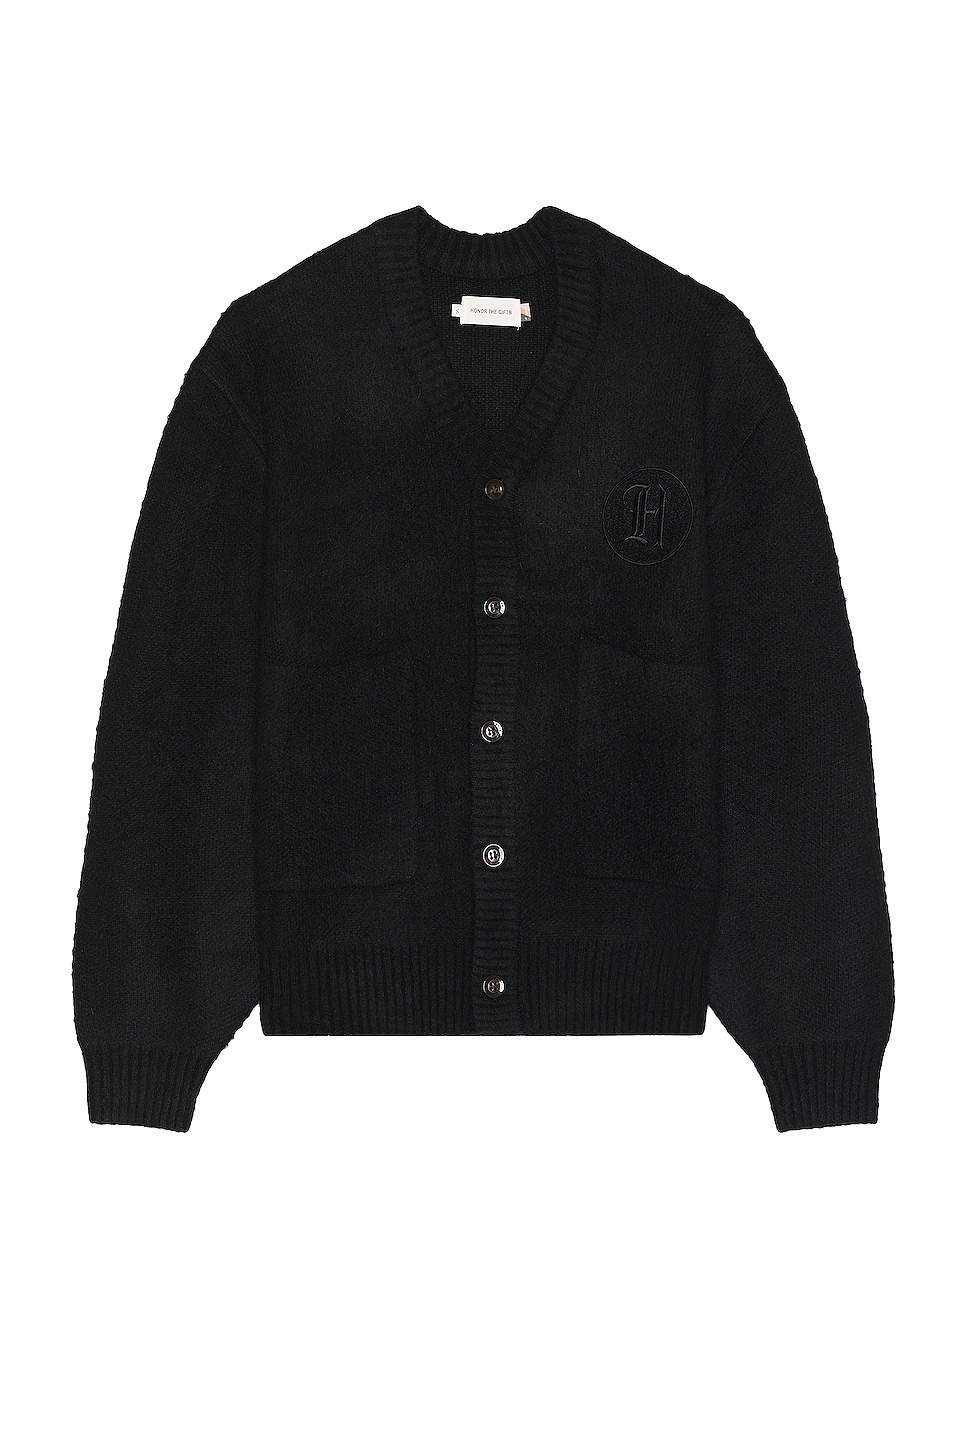 Honor The Gift Stamped Patch Cardigan in Black | FWRD